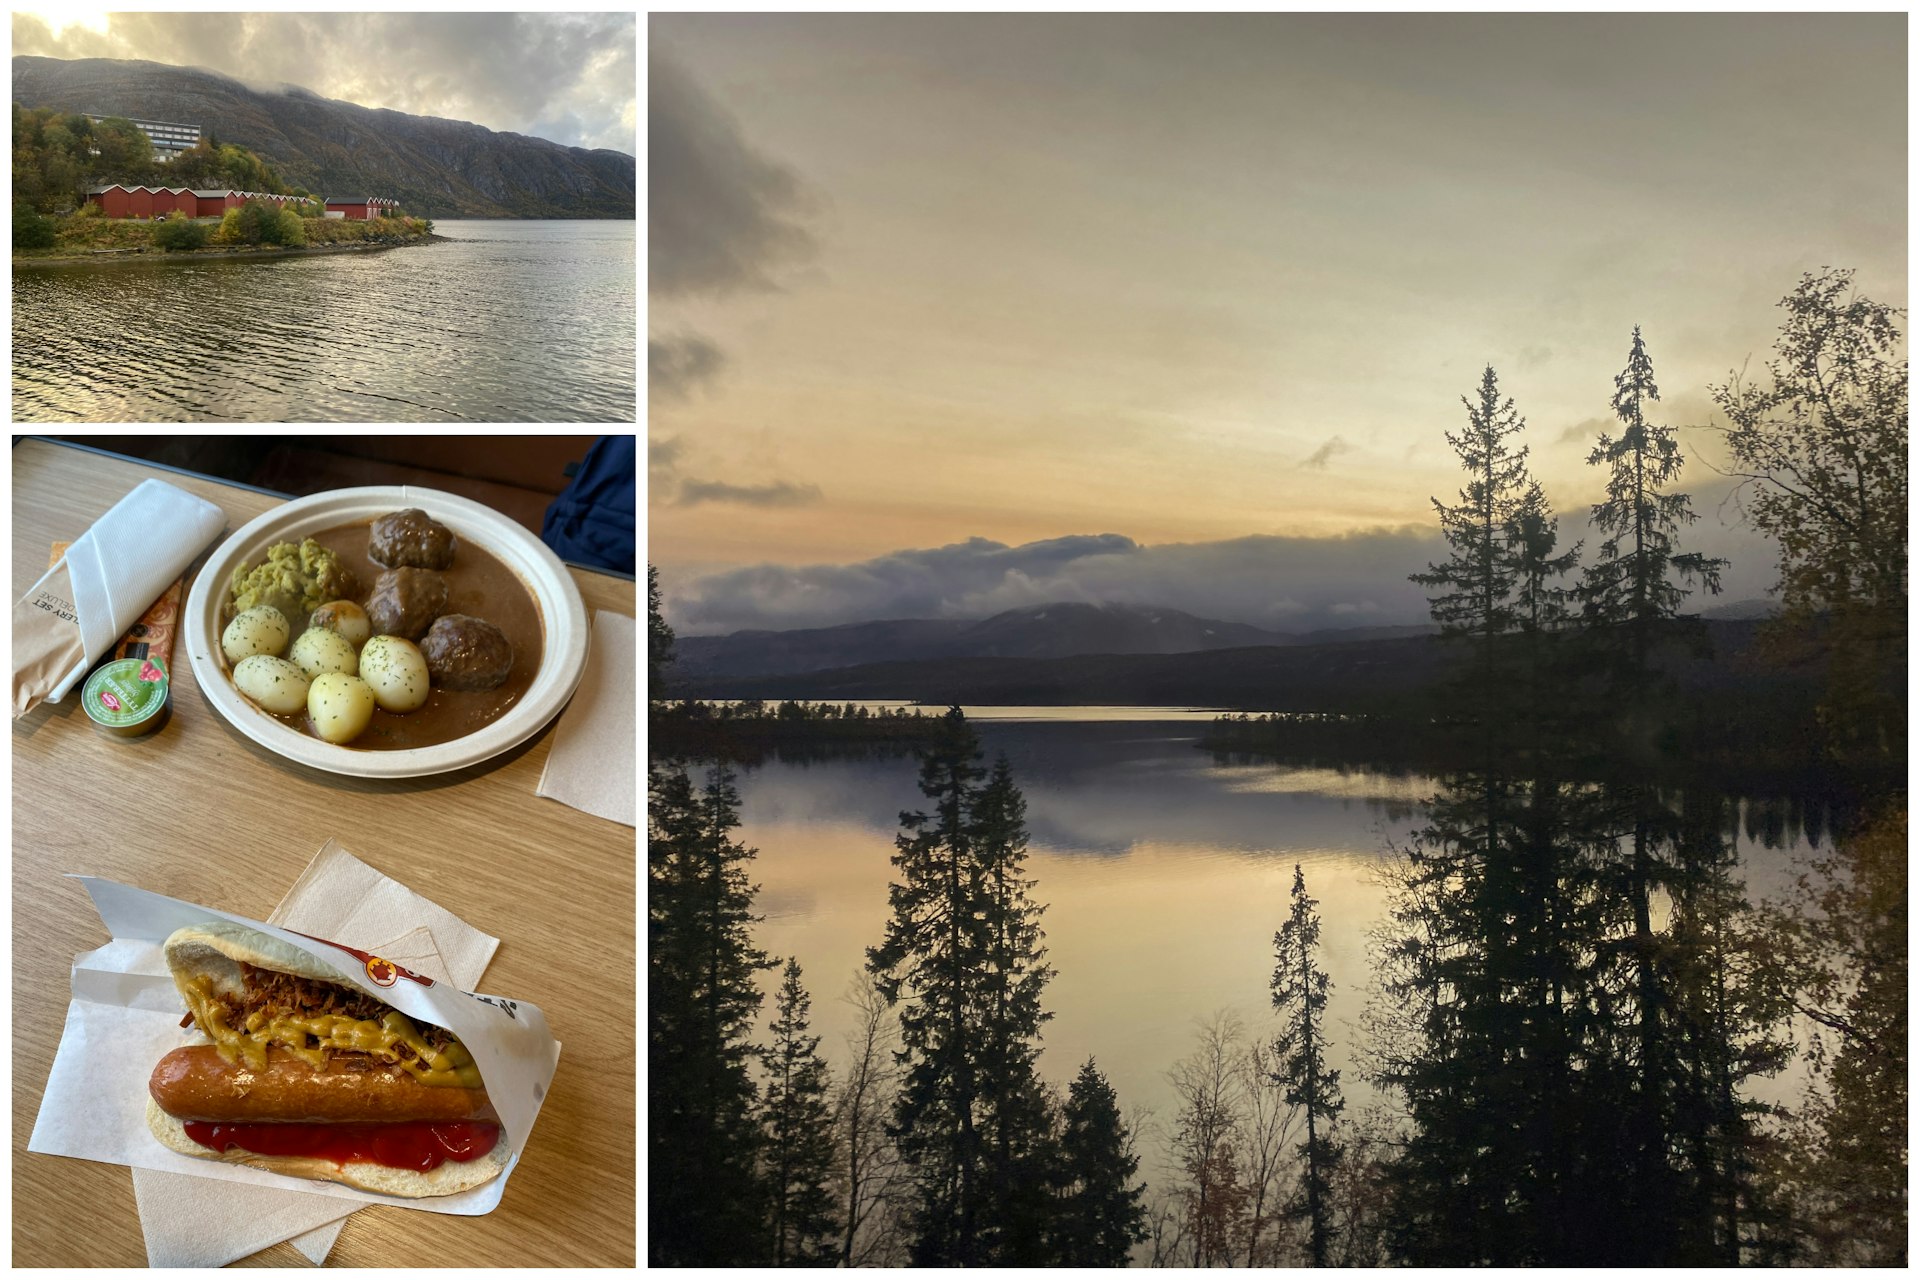 A collage of images from a train journey through the Arctic Circle including sunset over a lake and a dinner onboard the train featuring stew and a hot dog